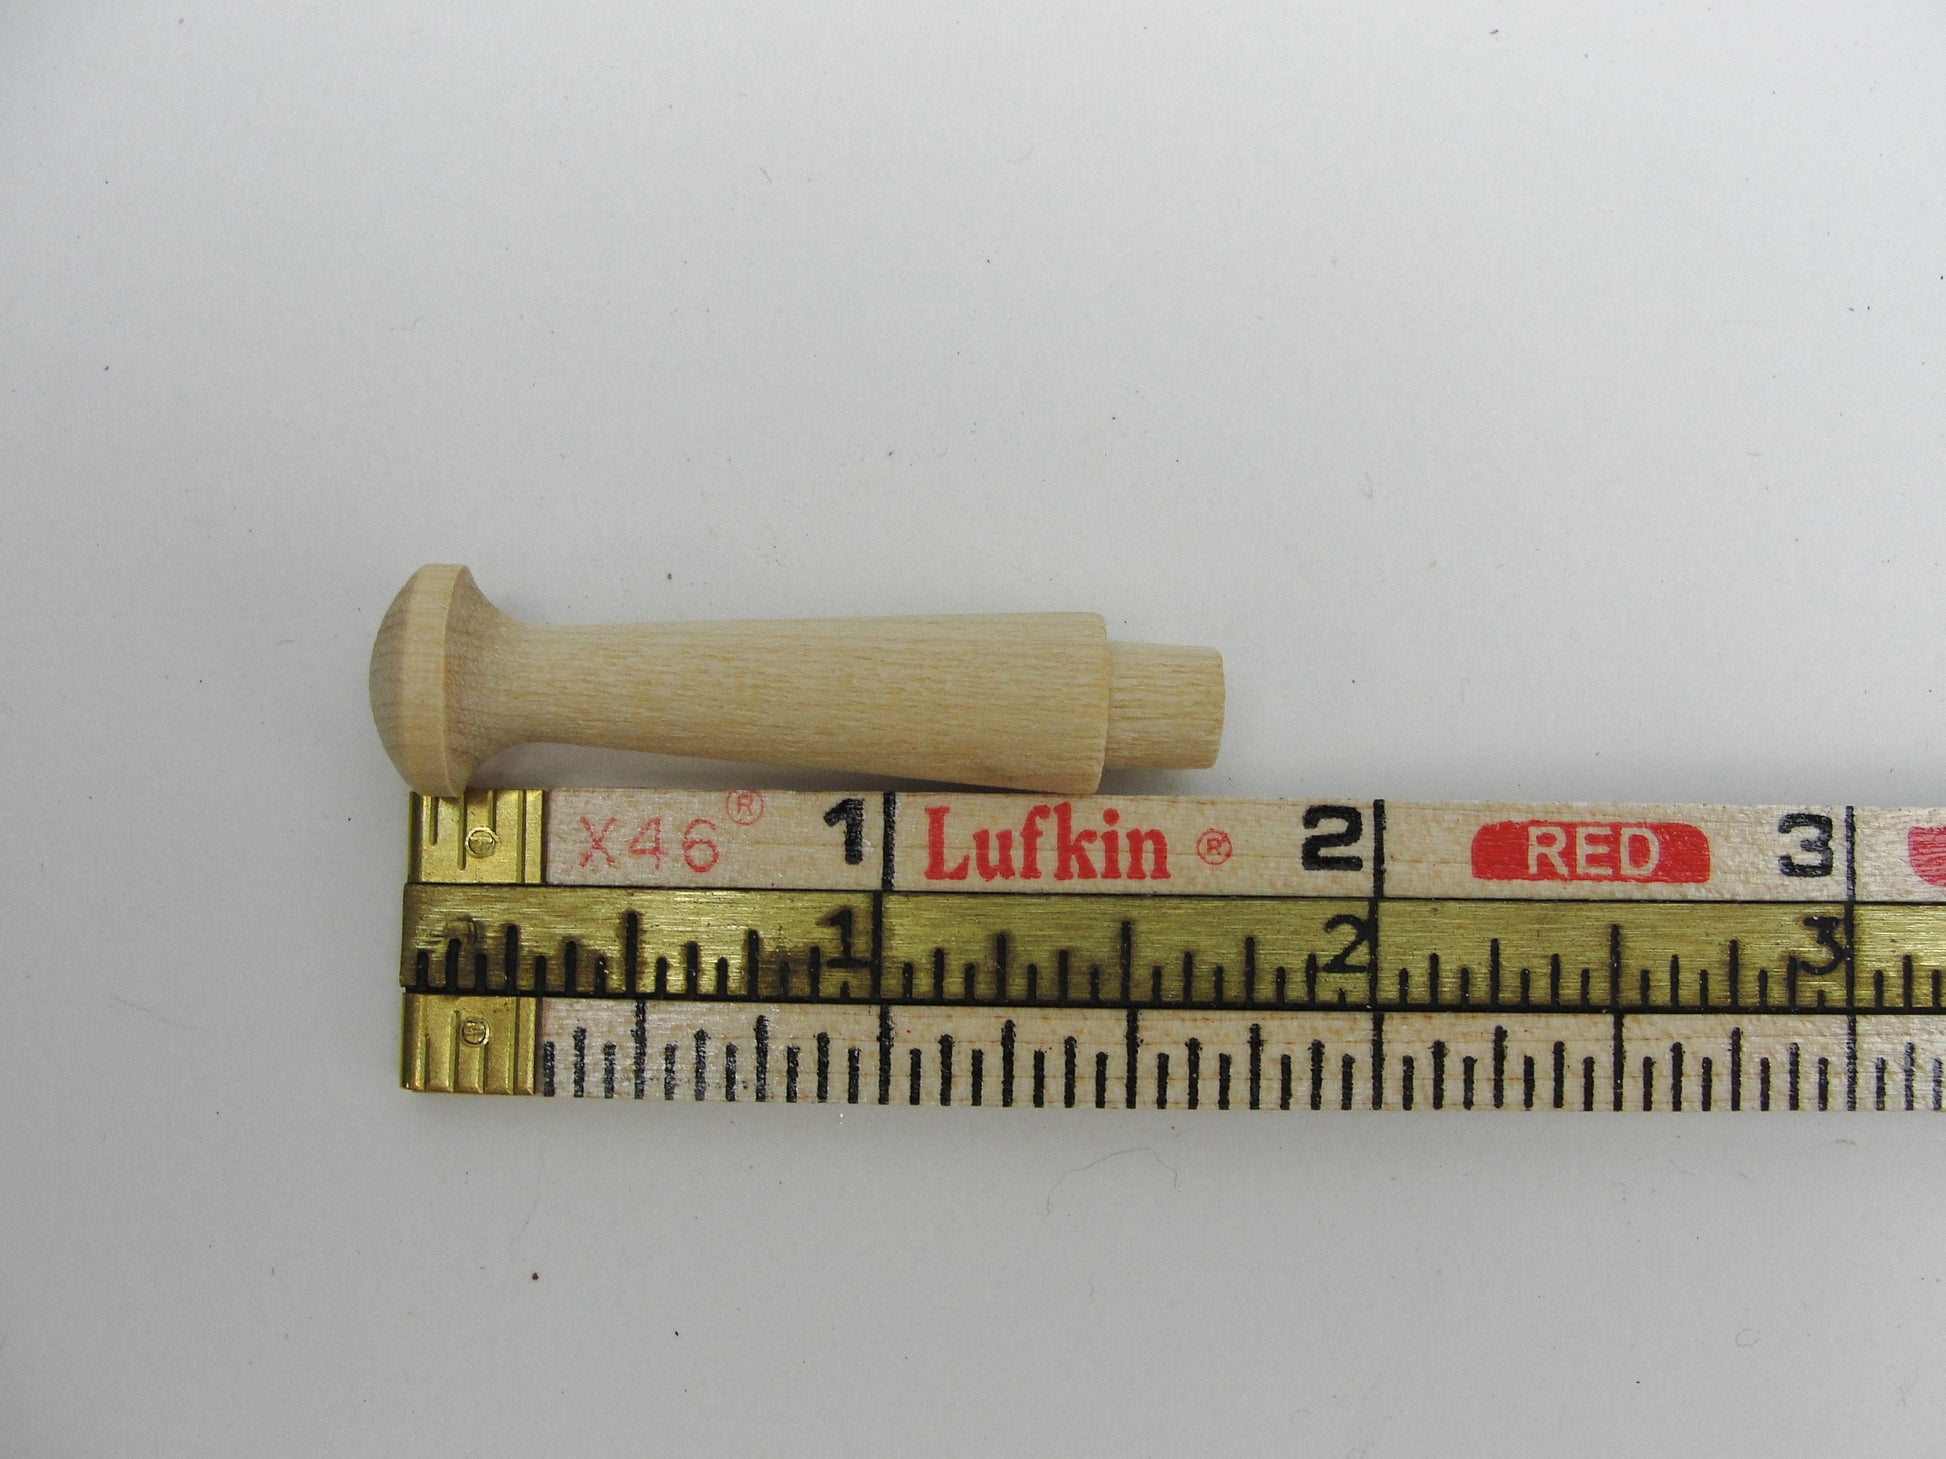 Small shaker pegs 1 3/4" birch set of 6 - Wood parts - Craft Supply House